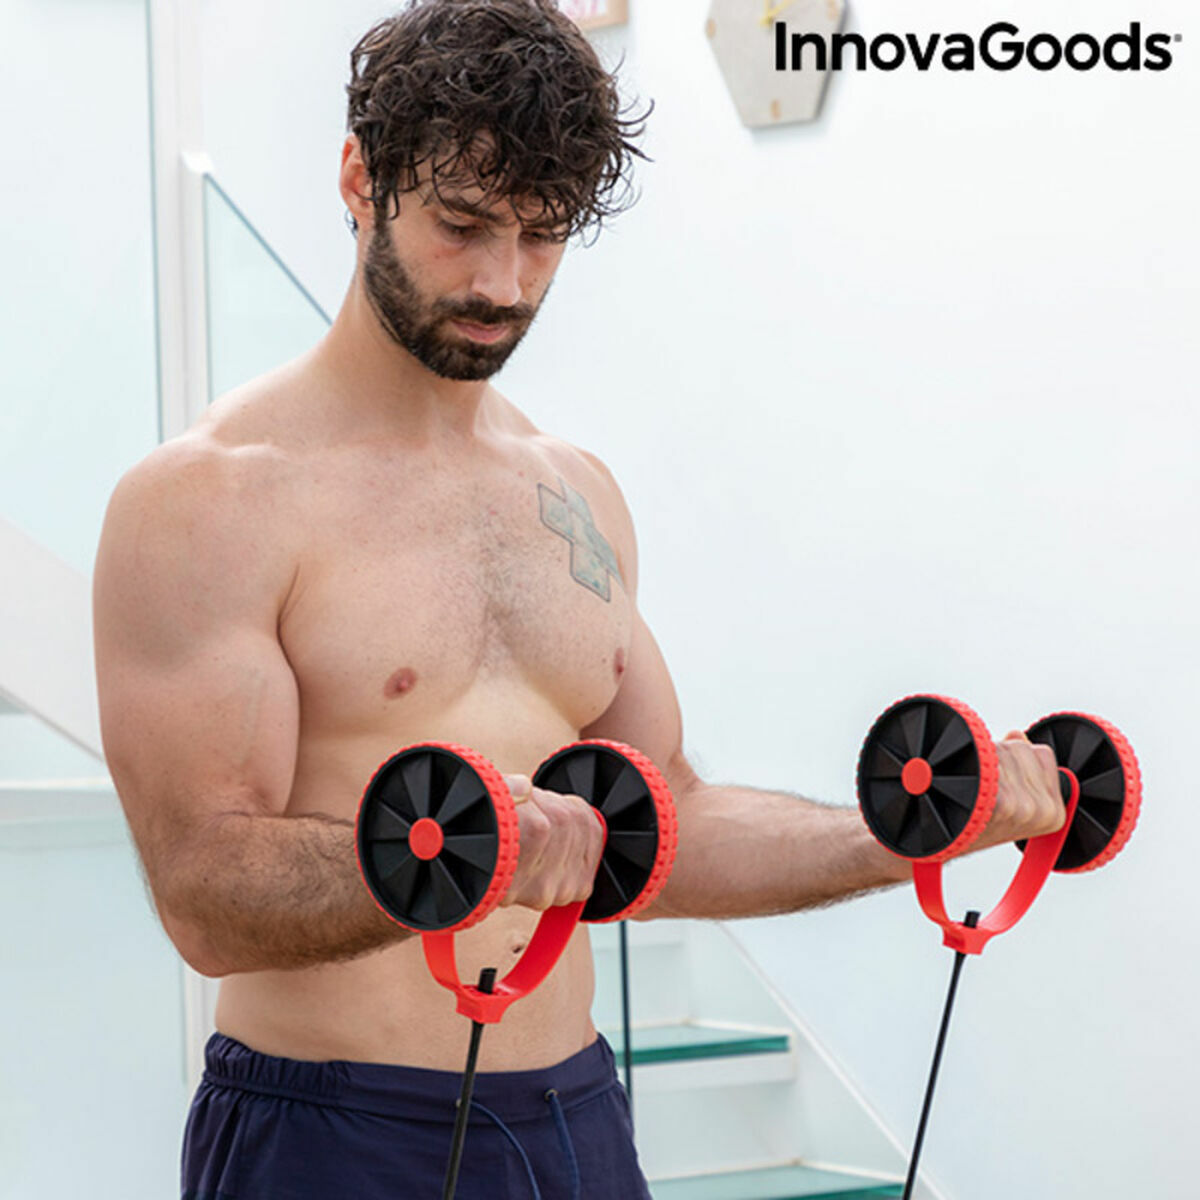 Abdominal Roller with Rotating Discs, Elastic Bands and Exercise Guide InnovaGoods Twabanarm (Refurbished B)